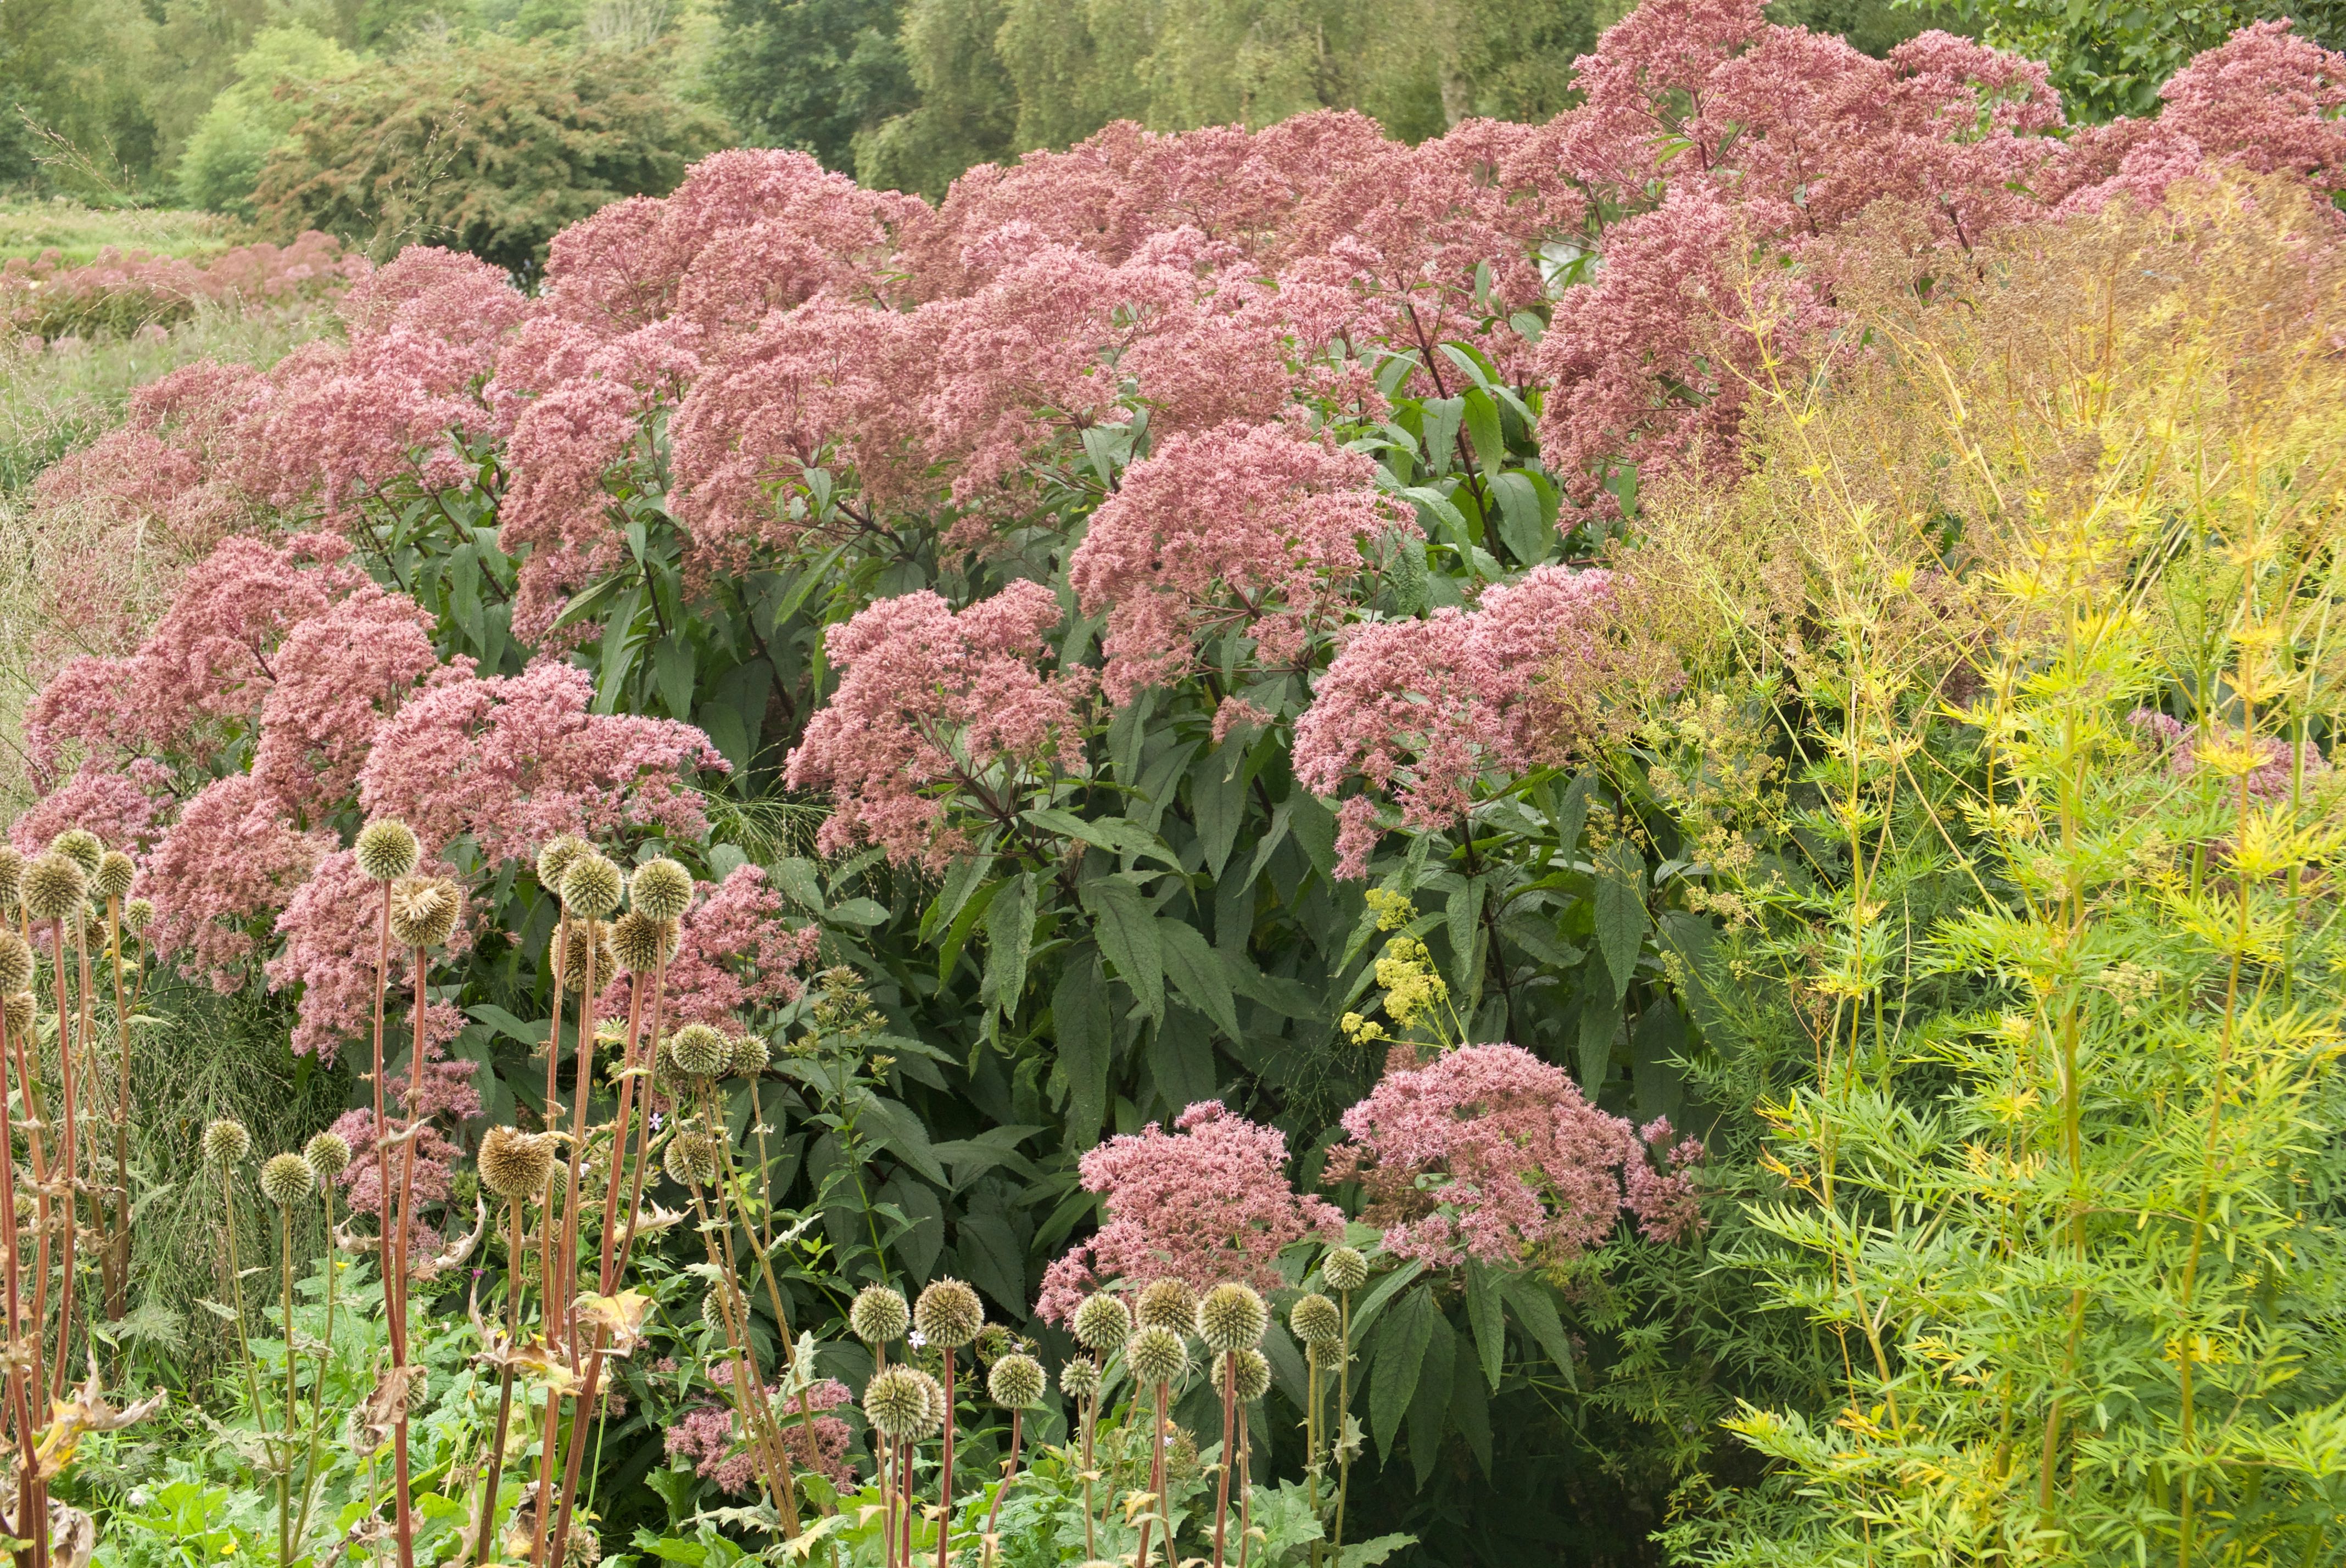 The flowers on these Eupatorium purpureum were larger than any I've ever seen.